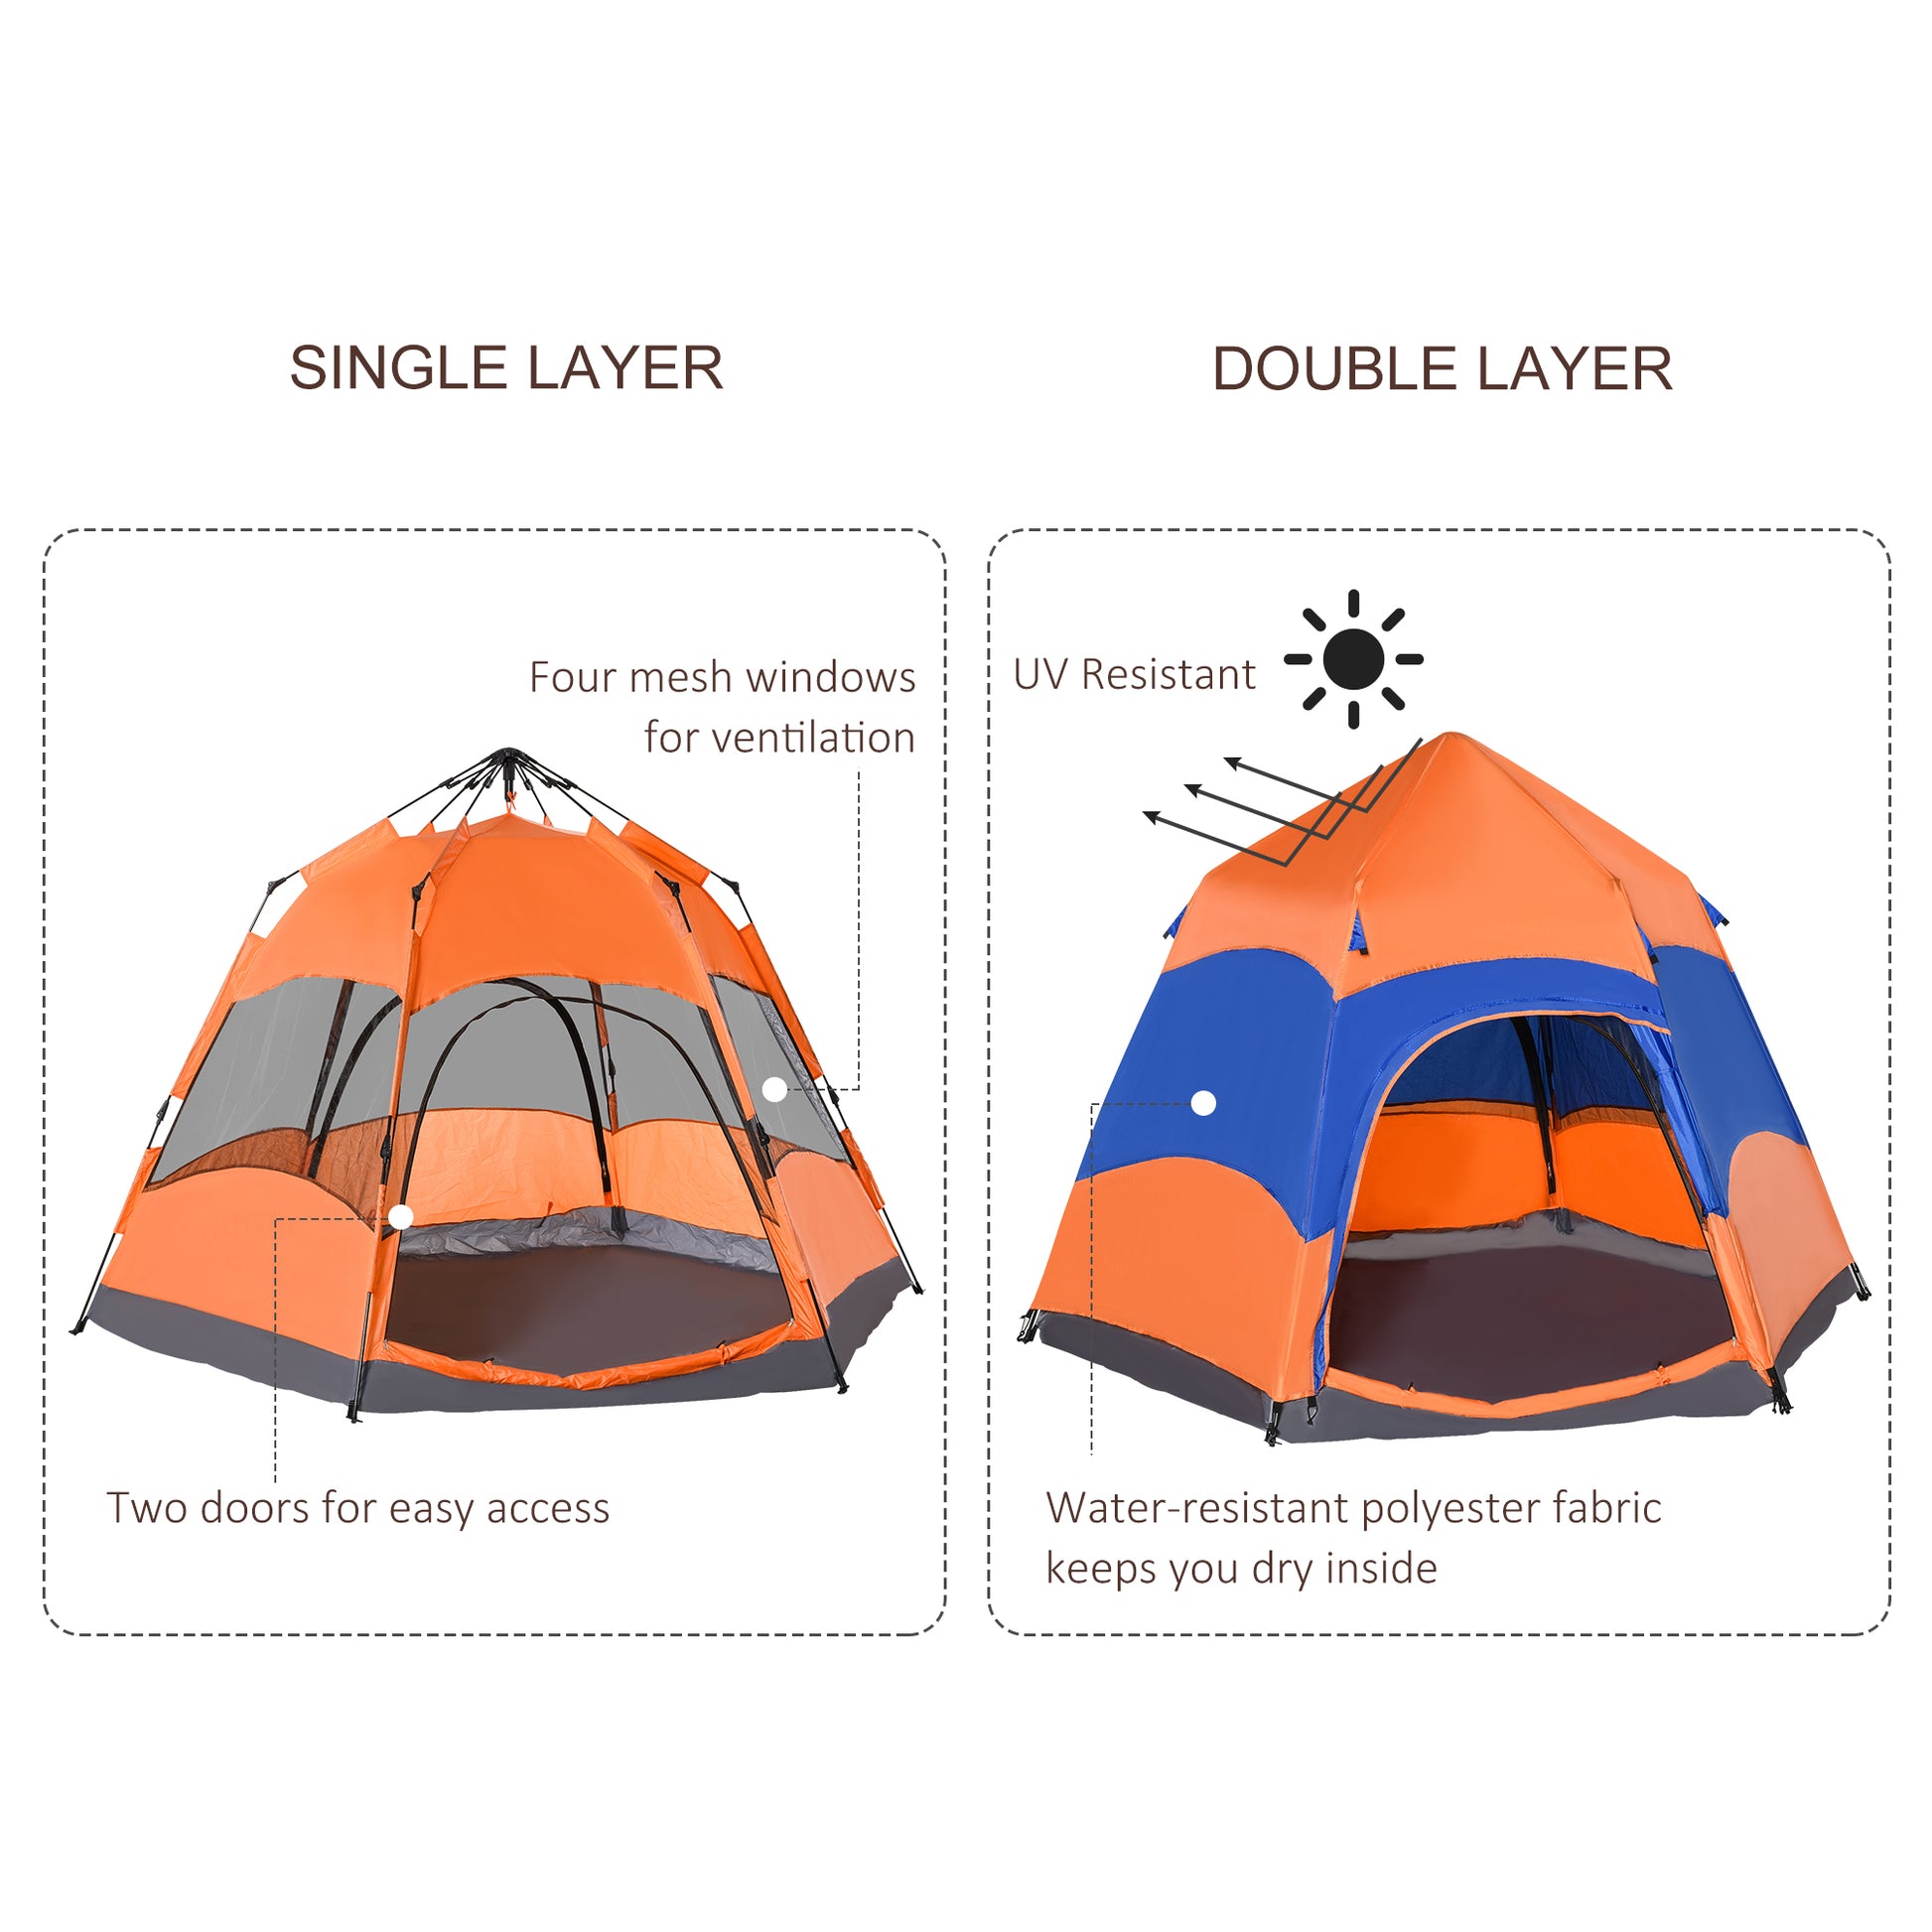 Hexagon Double Layer Easy Pop Up Camping Tent 4-6 Person Portable Folding Dome Shelter Hiking Travel Tent All Season Used at Gallery Canada